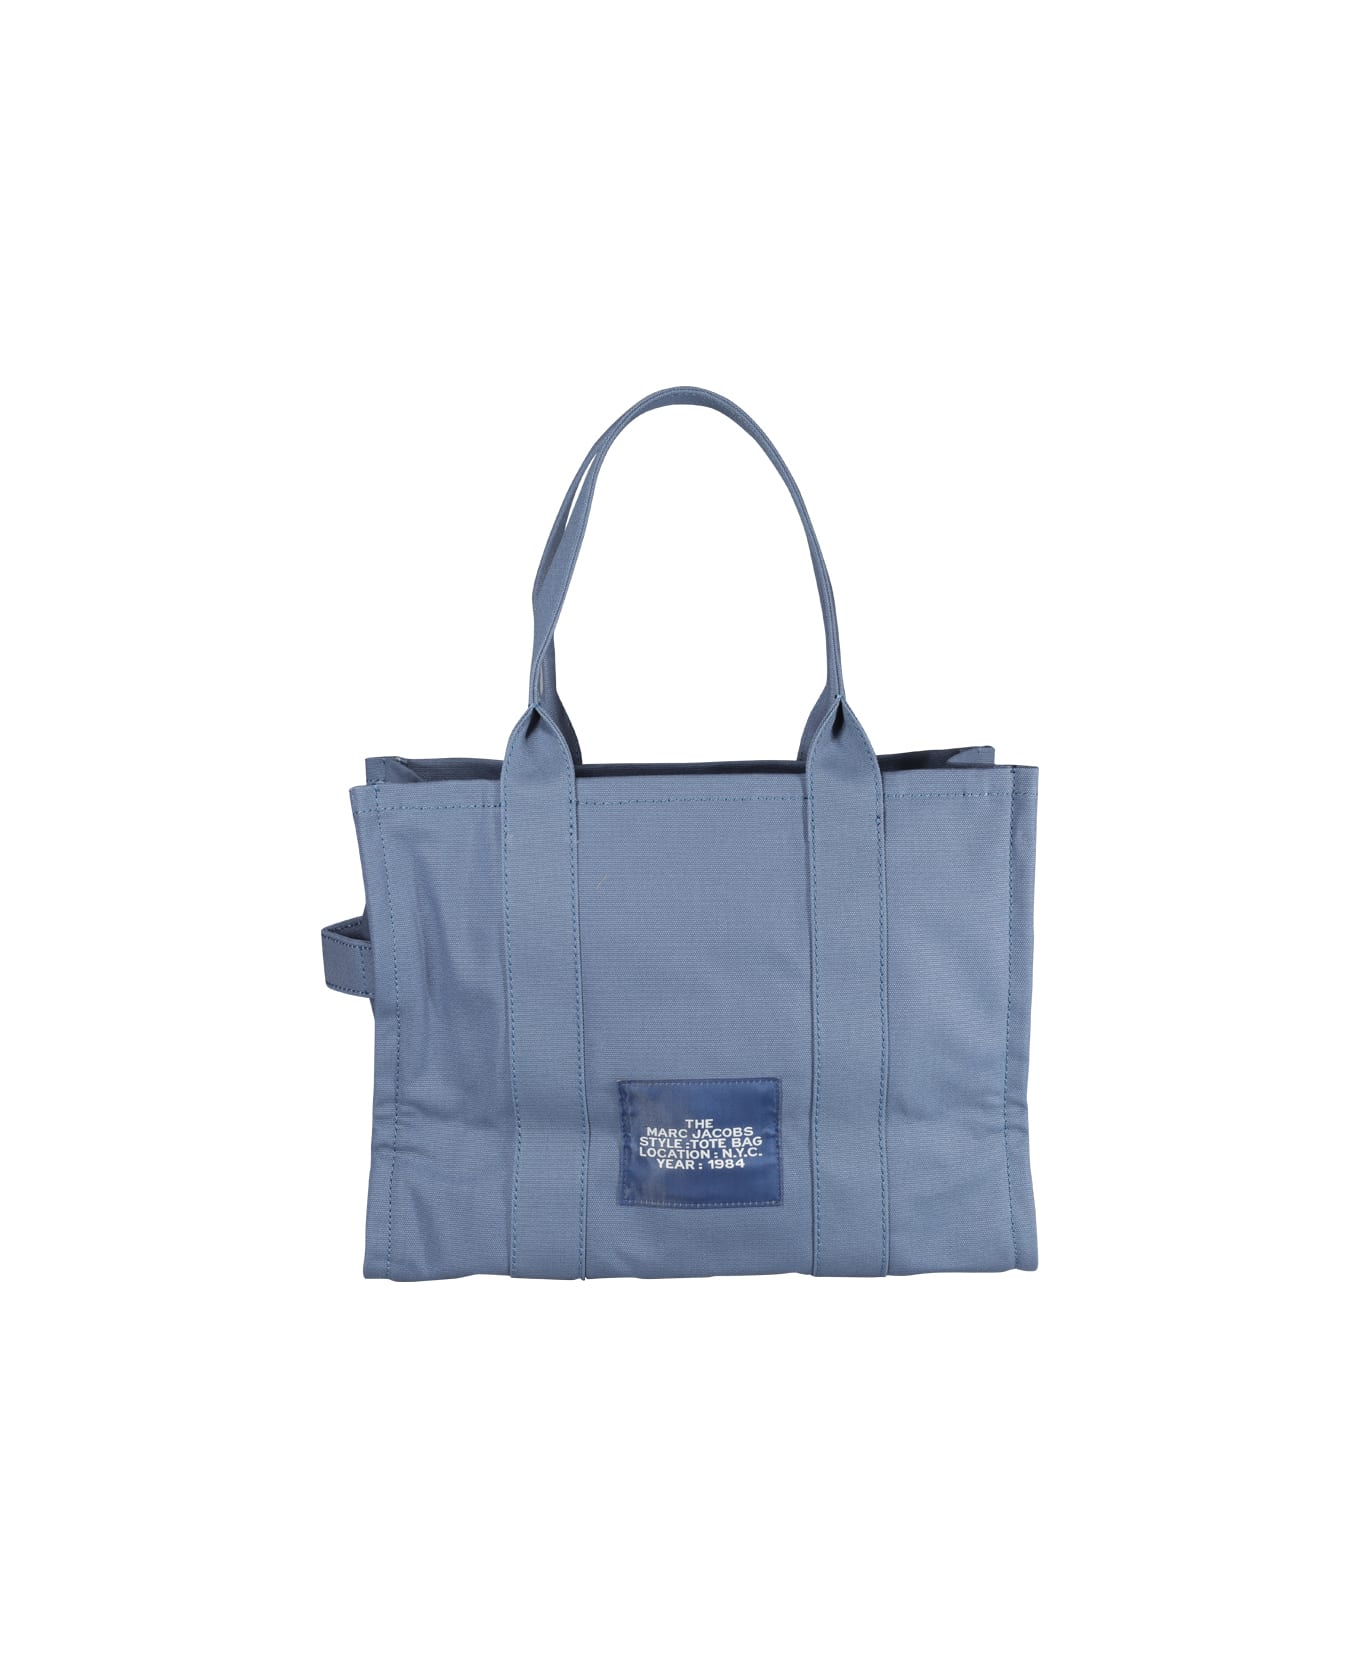 Marc Jacobs The Large Tote Bag - Blue shadow トートバッグ